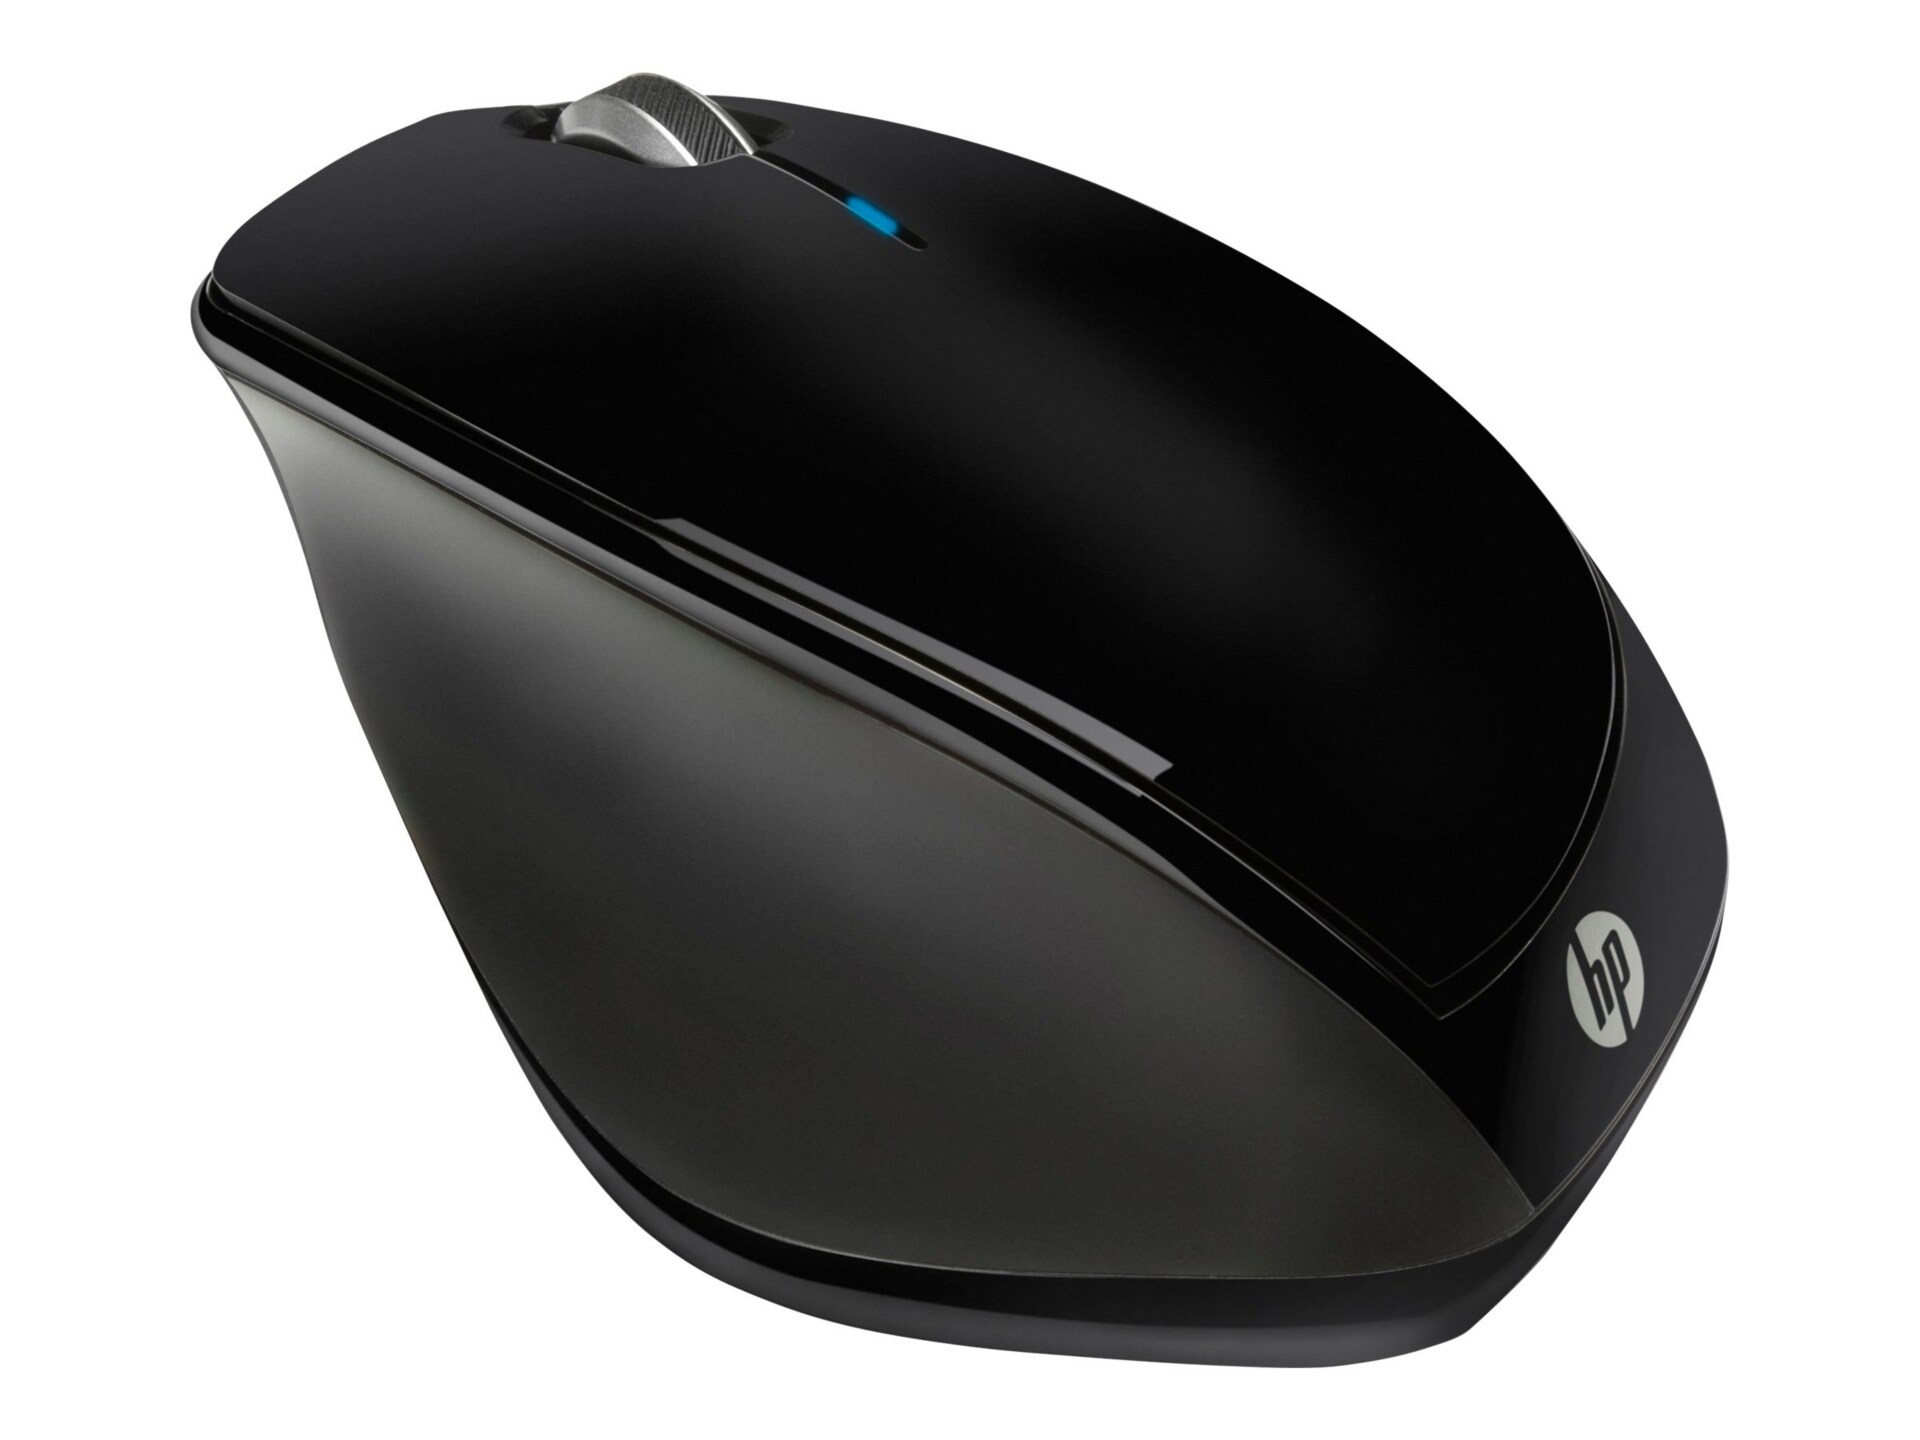 HP x4500 - mouse - 2.4 GHz